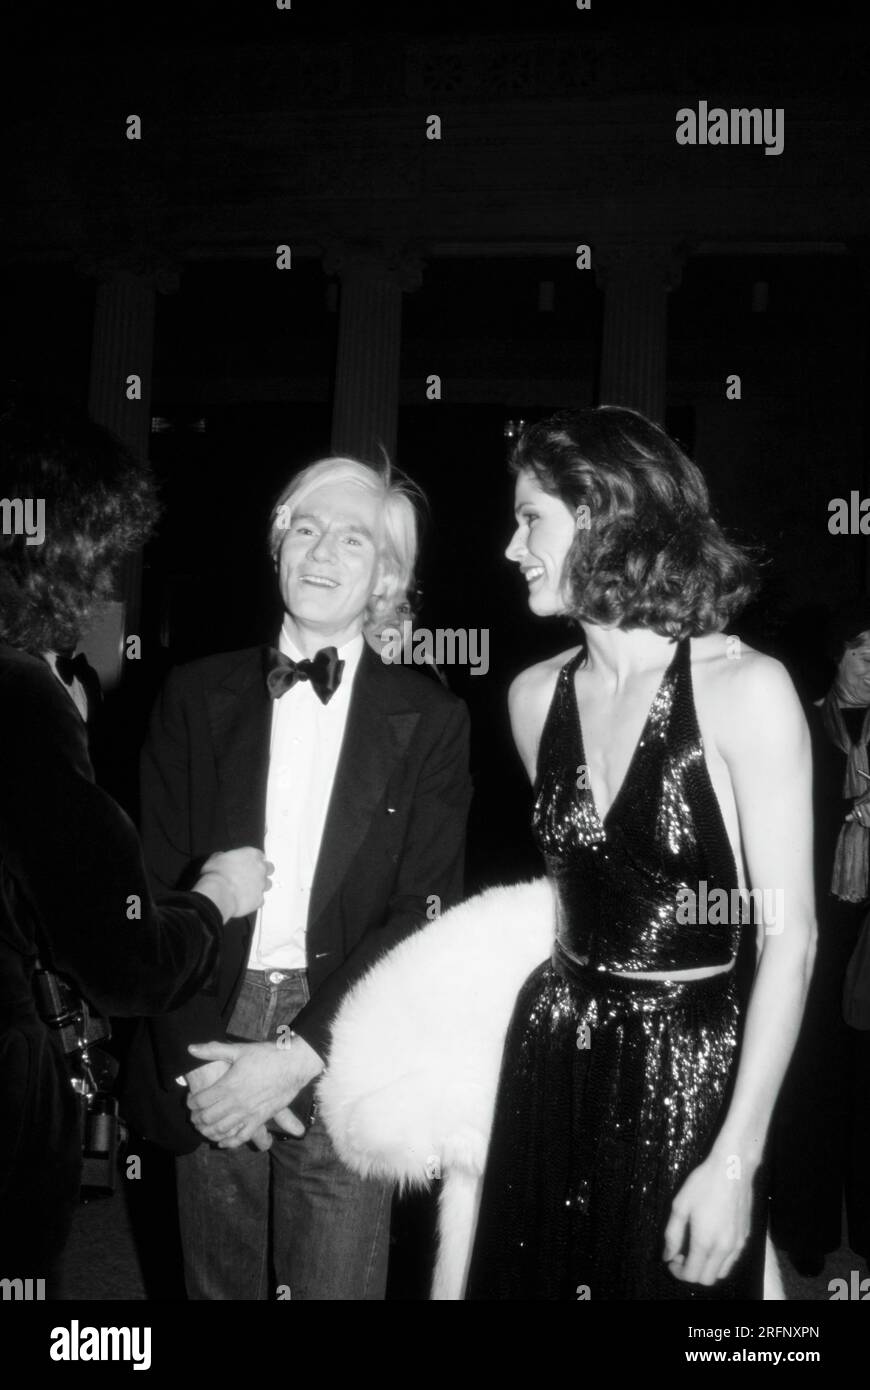 Andy Warhol with unidentified woman in evening gown in 1977. Warhol was an American visual artist, film director, producer, and leading figure in the pop art movement. His works explore the relationship between artistic expression, advertising, and celebrity culture that flourished by the 1960s, and span a variety of media, including painting, silkscreening, photography, film, and sculpture. Some of his best-known works include the silkscreen paintings Campbell's Soup Cans  and Marilyn Diptych. Photo by Bernard Gotfryd Stock Photo